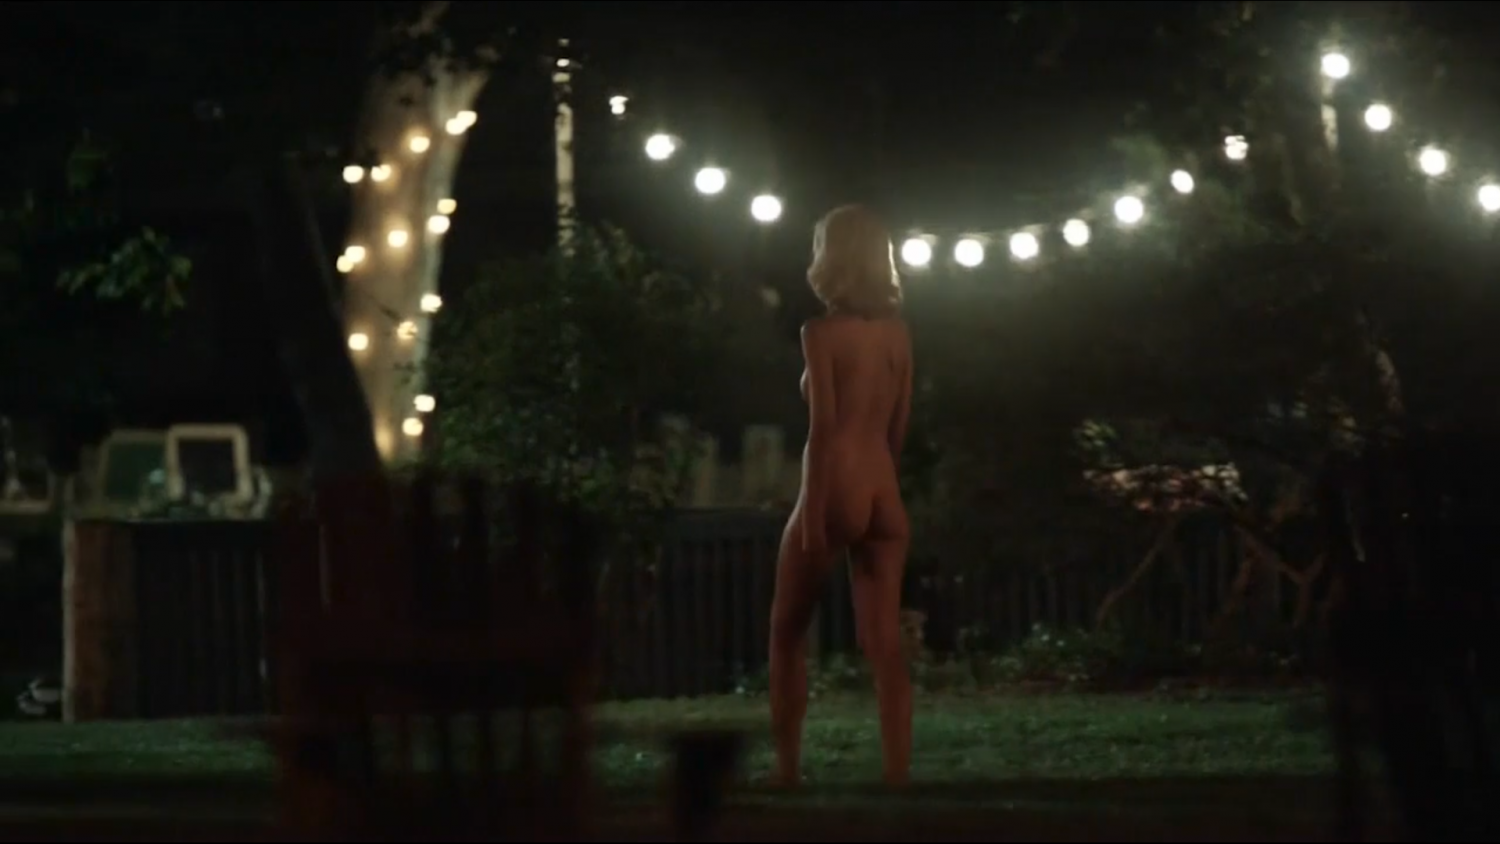 Caitlin fitzgerald naked